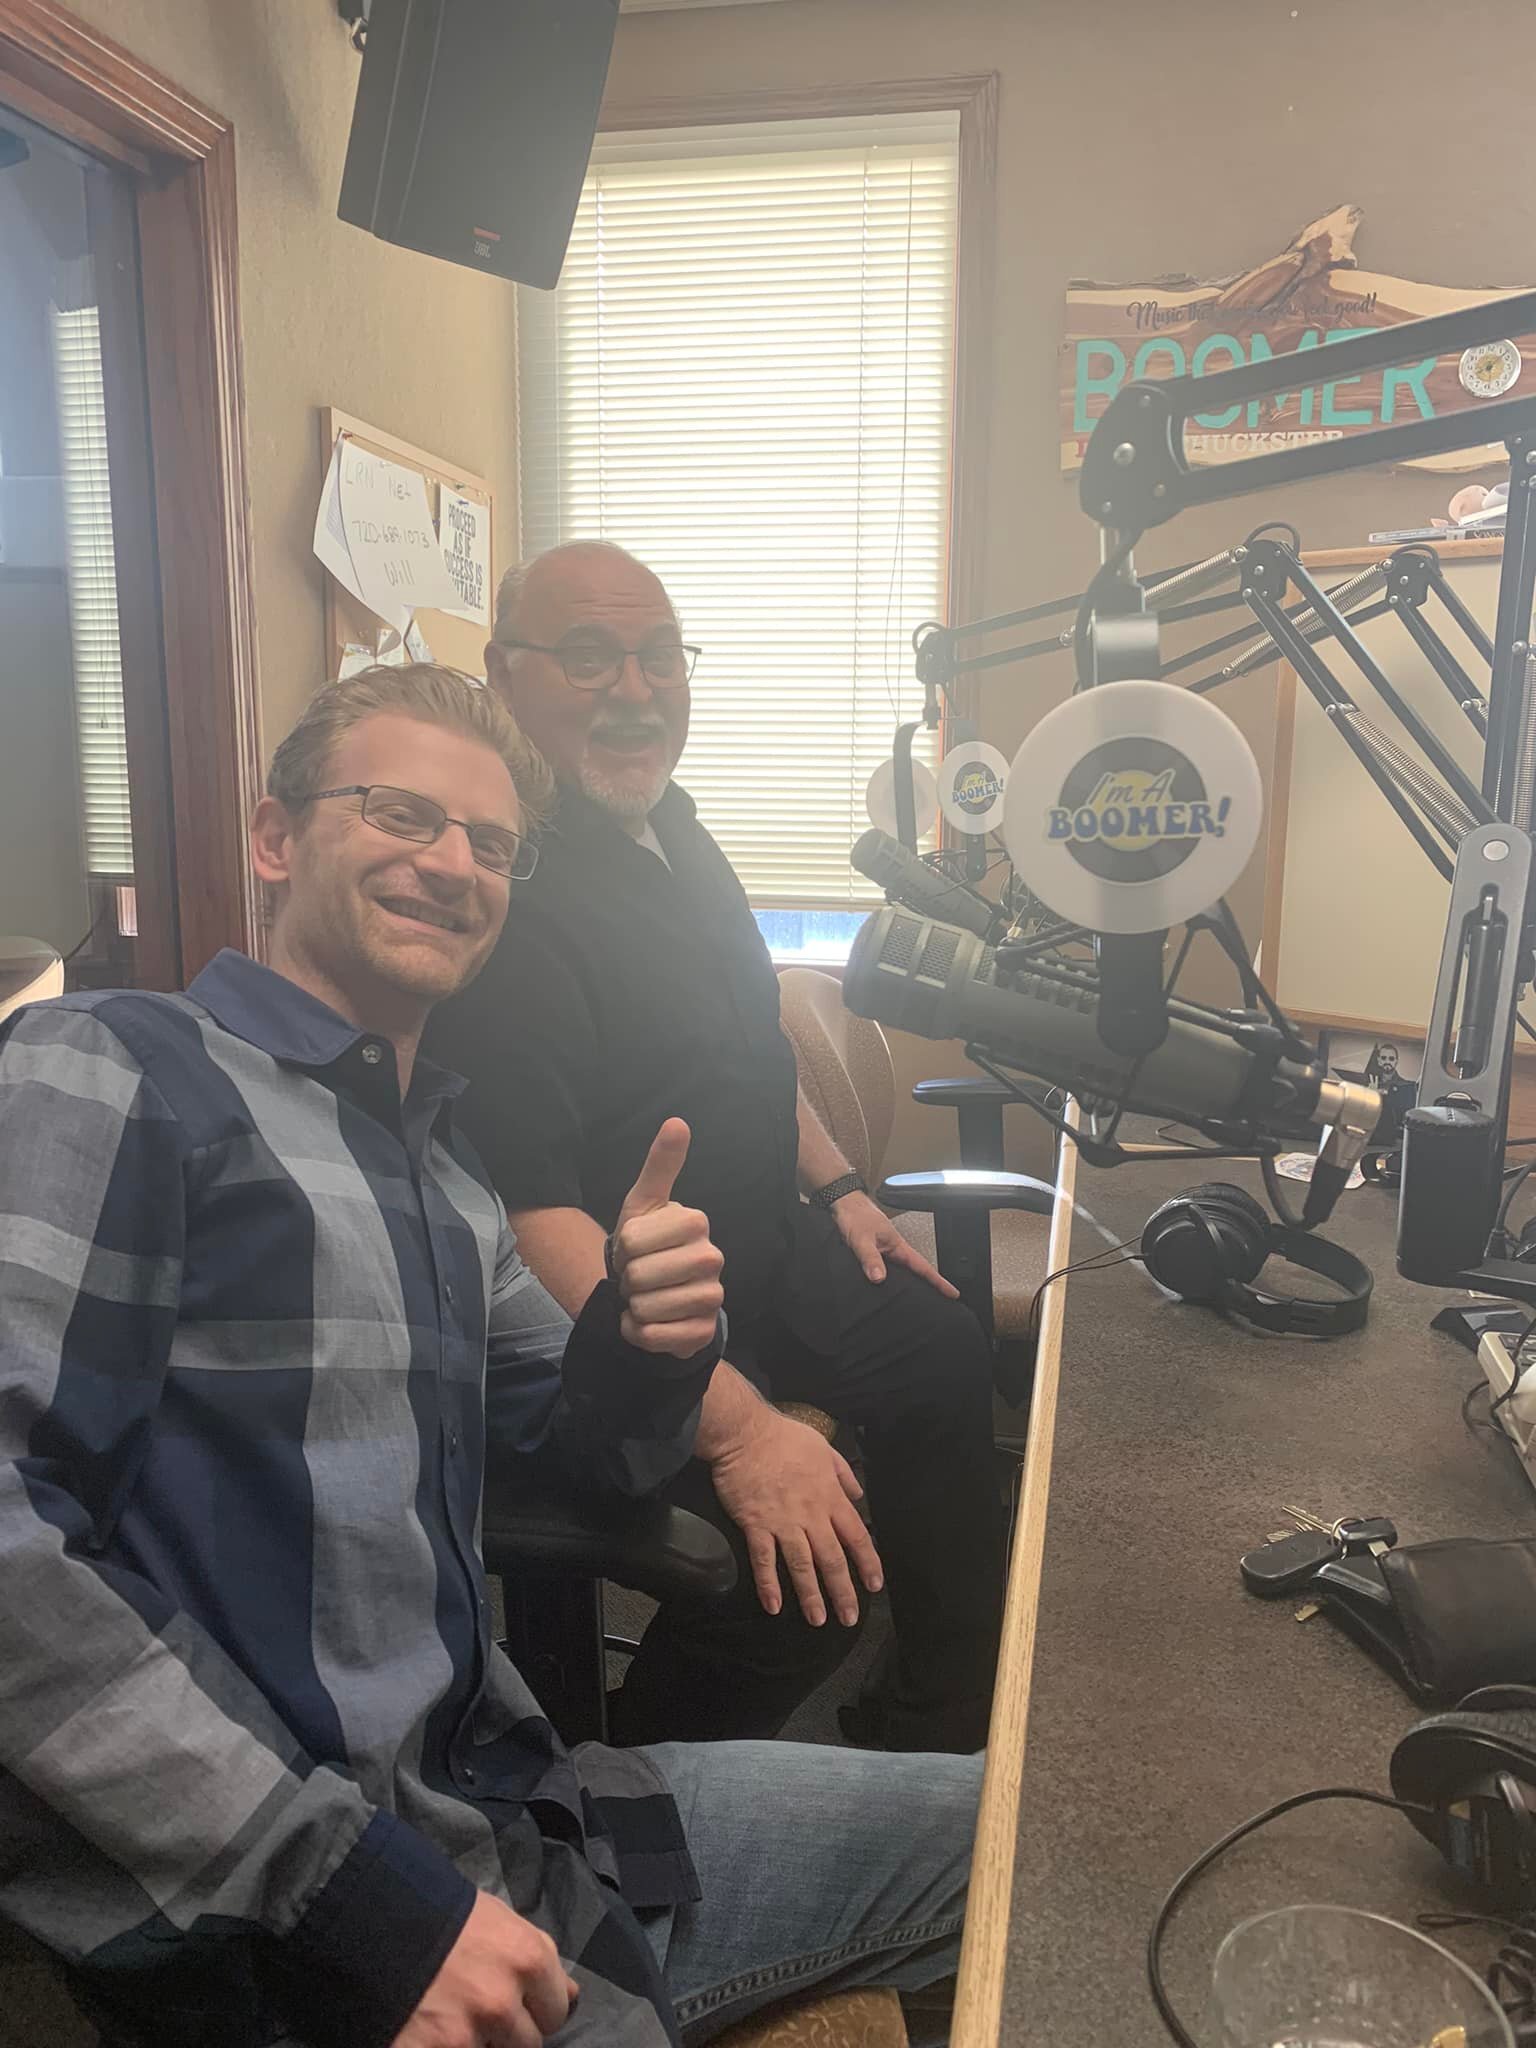 Rick Spurgin from Floyd I did an interview this morning on My Boomer Radio with the infamous host David Wingert promoting Kanesville Symphony Orchestra&rsquo;s sold out show The Wall.

We are joined by members of the Papillion Area Community Singers 